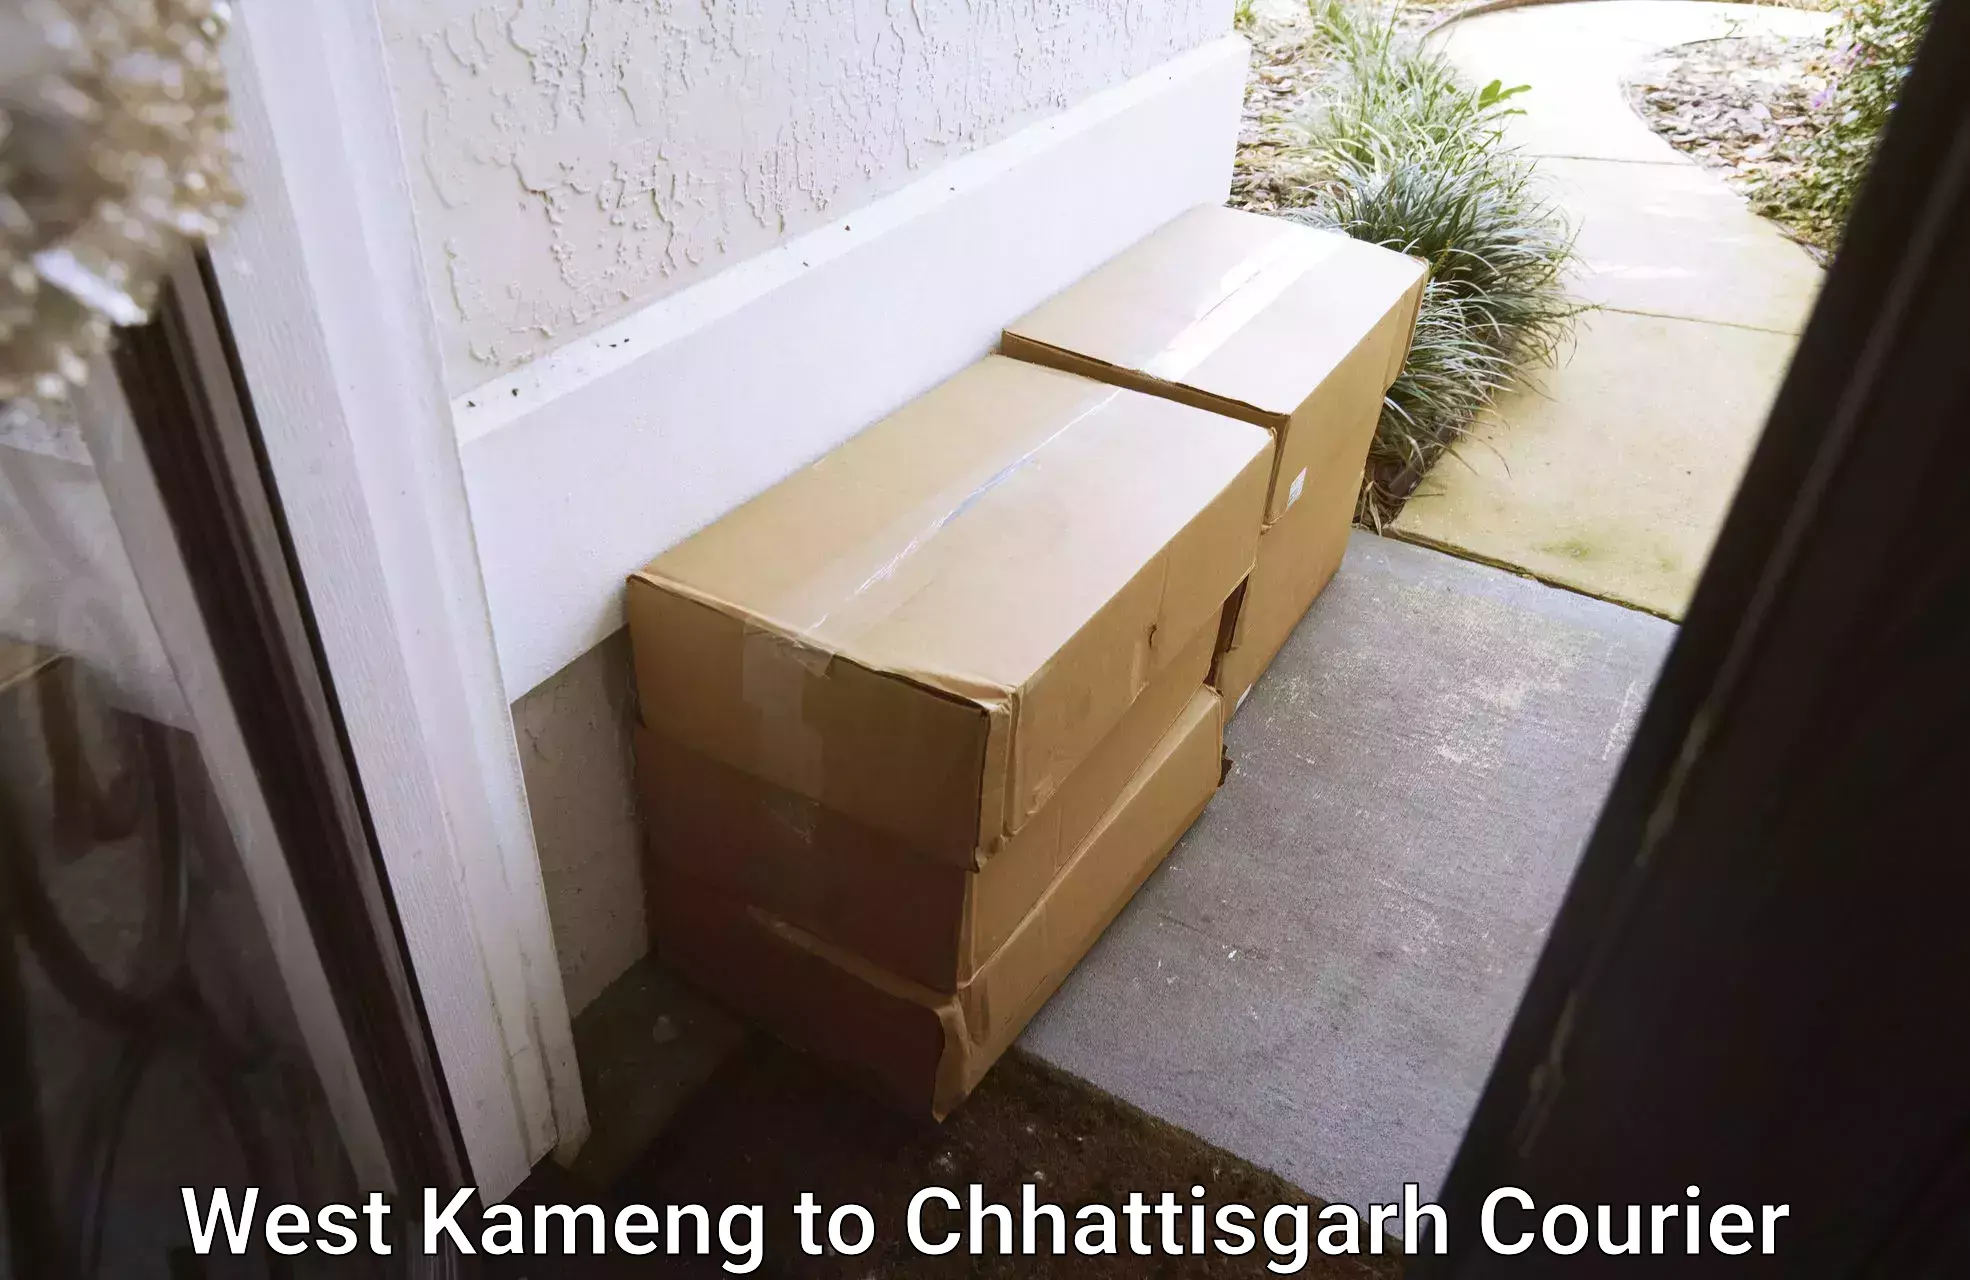 Courier app West Kameng to bagbahra